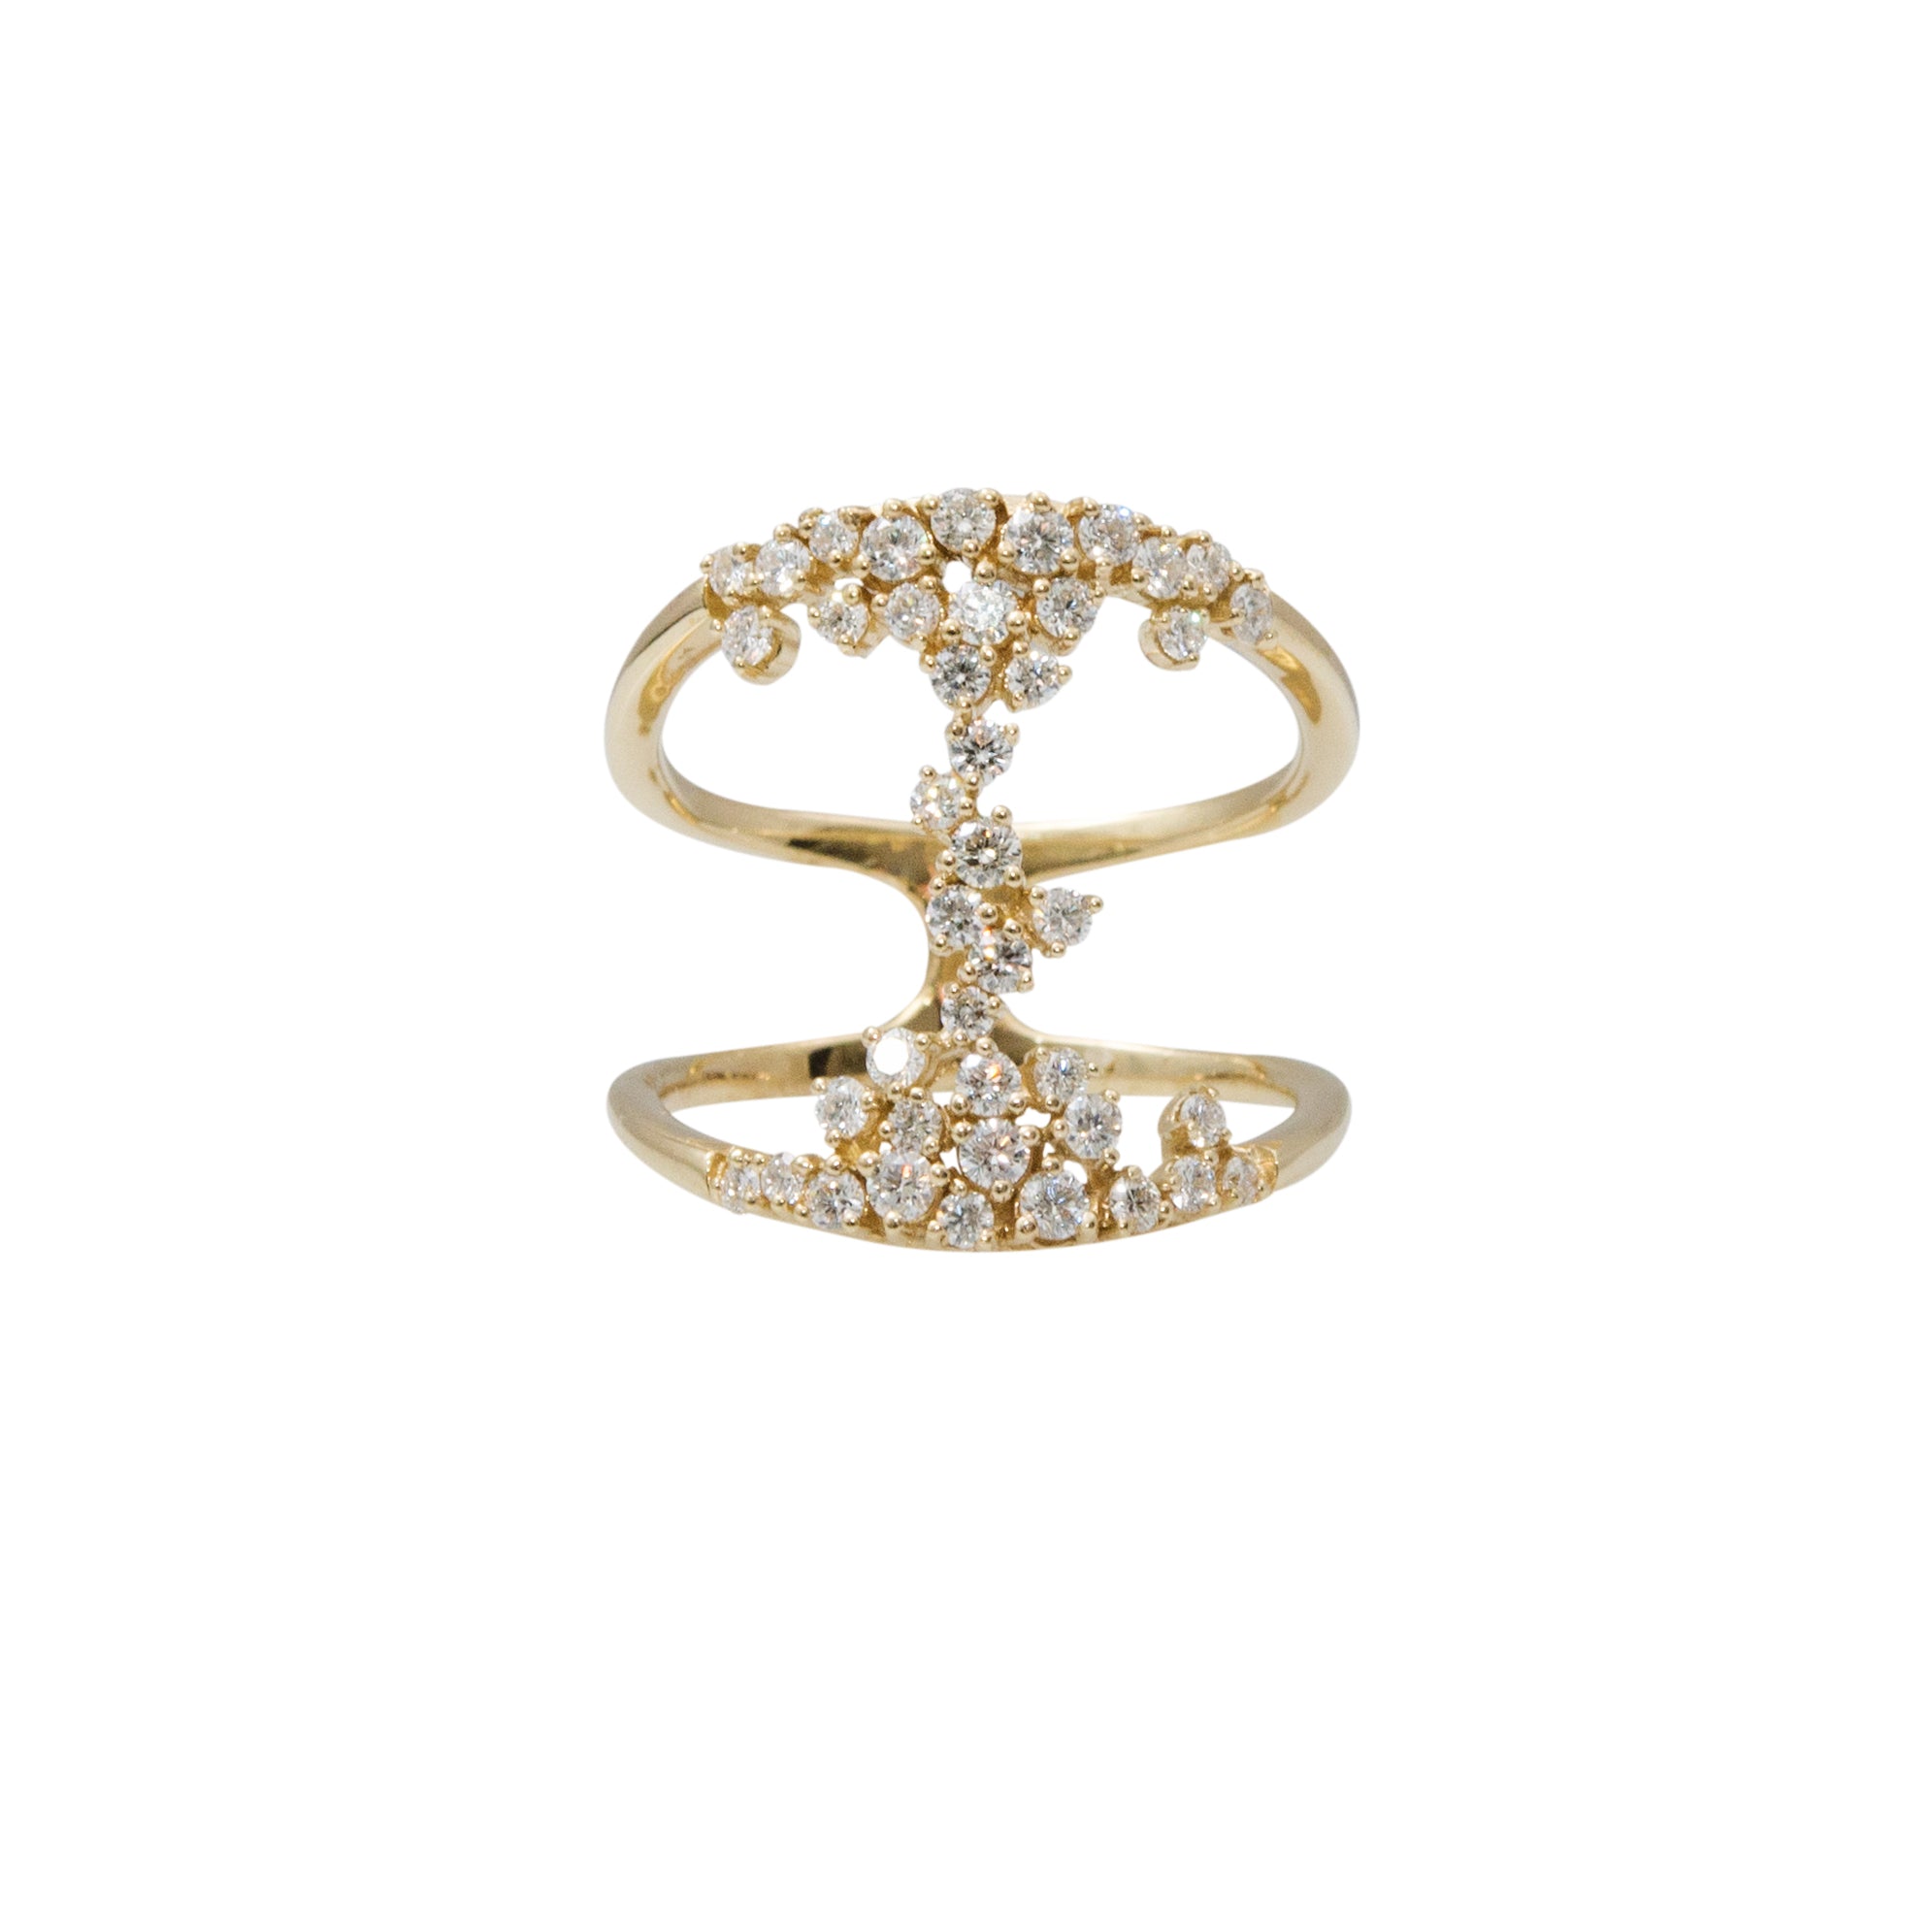 Glimmering 0.90 ct diamonds set in a dazzling freeform 18k yellow gold ring - simply stunning. Size 6.5 (resizable).